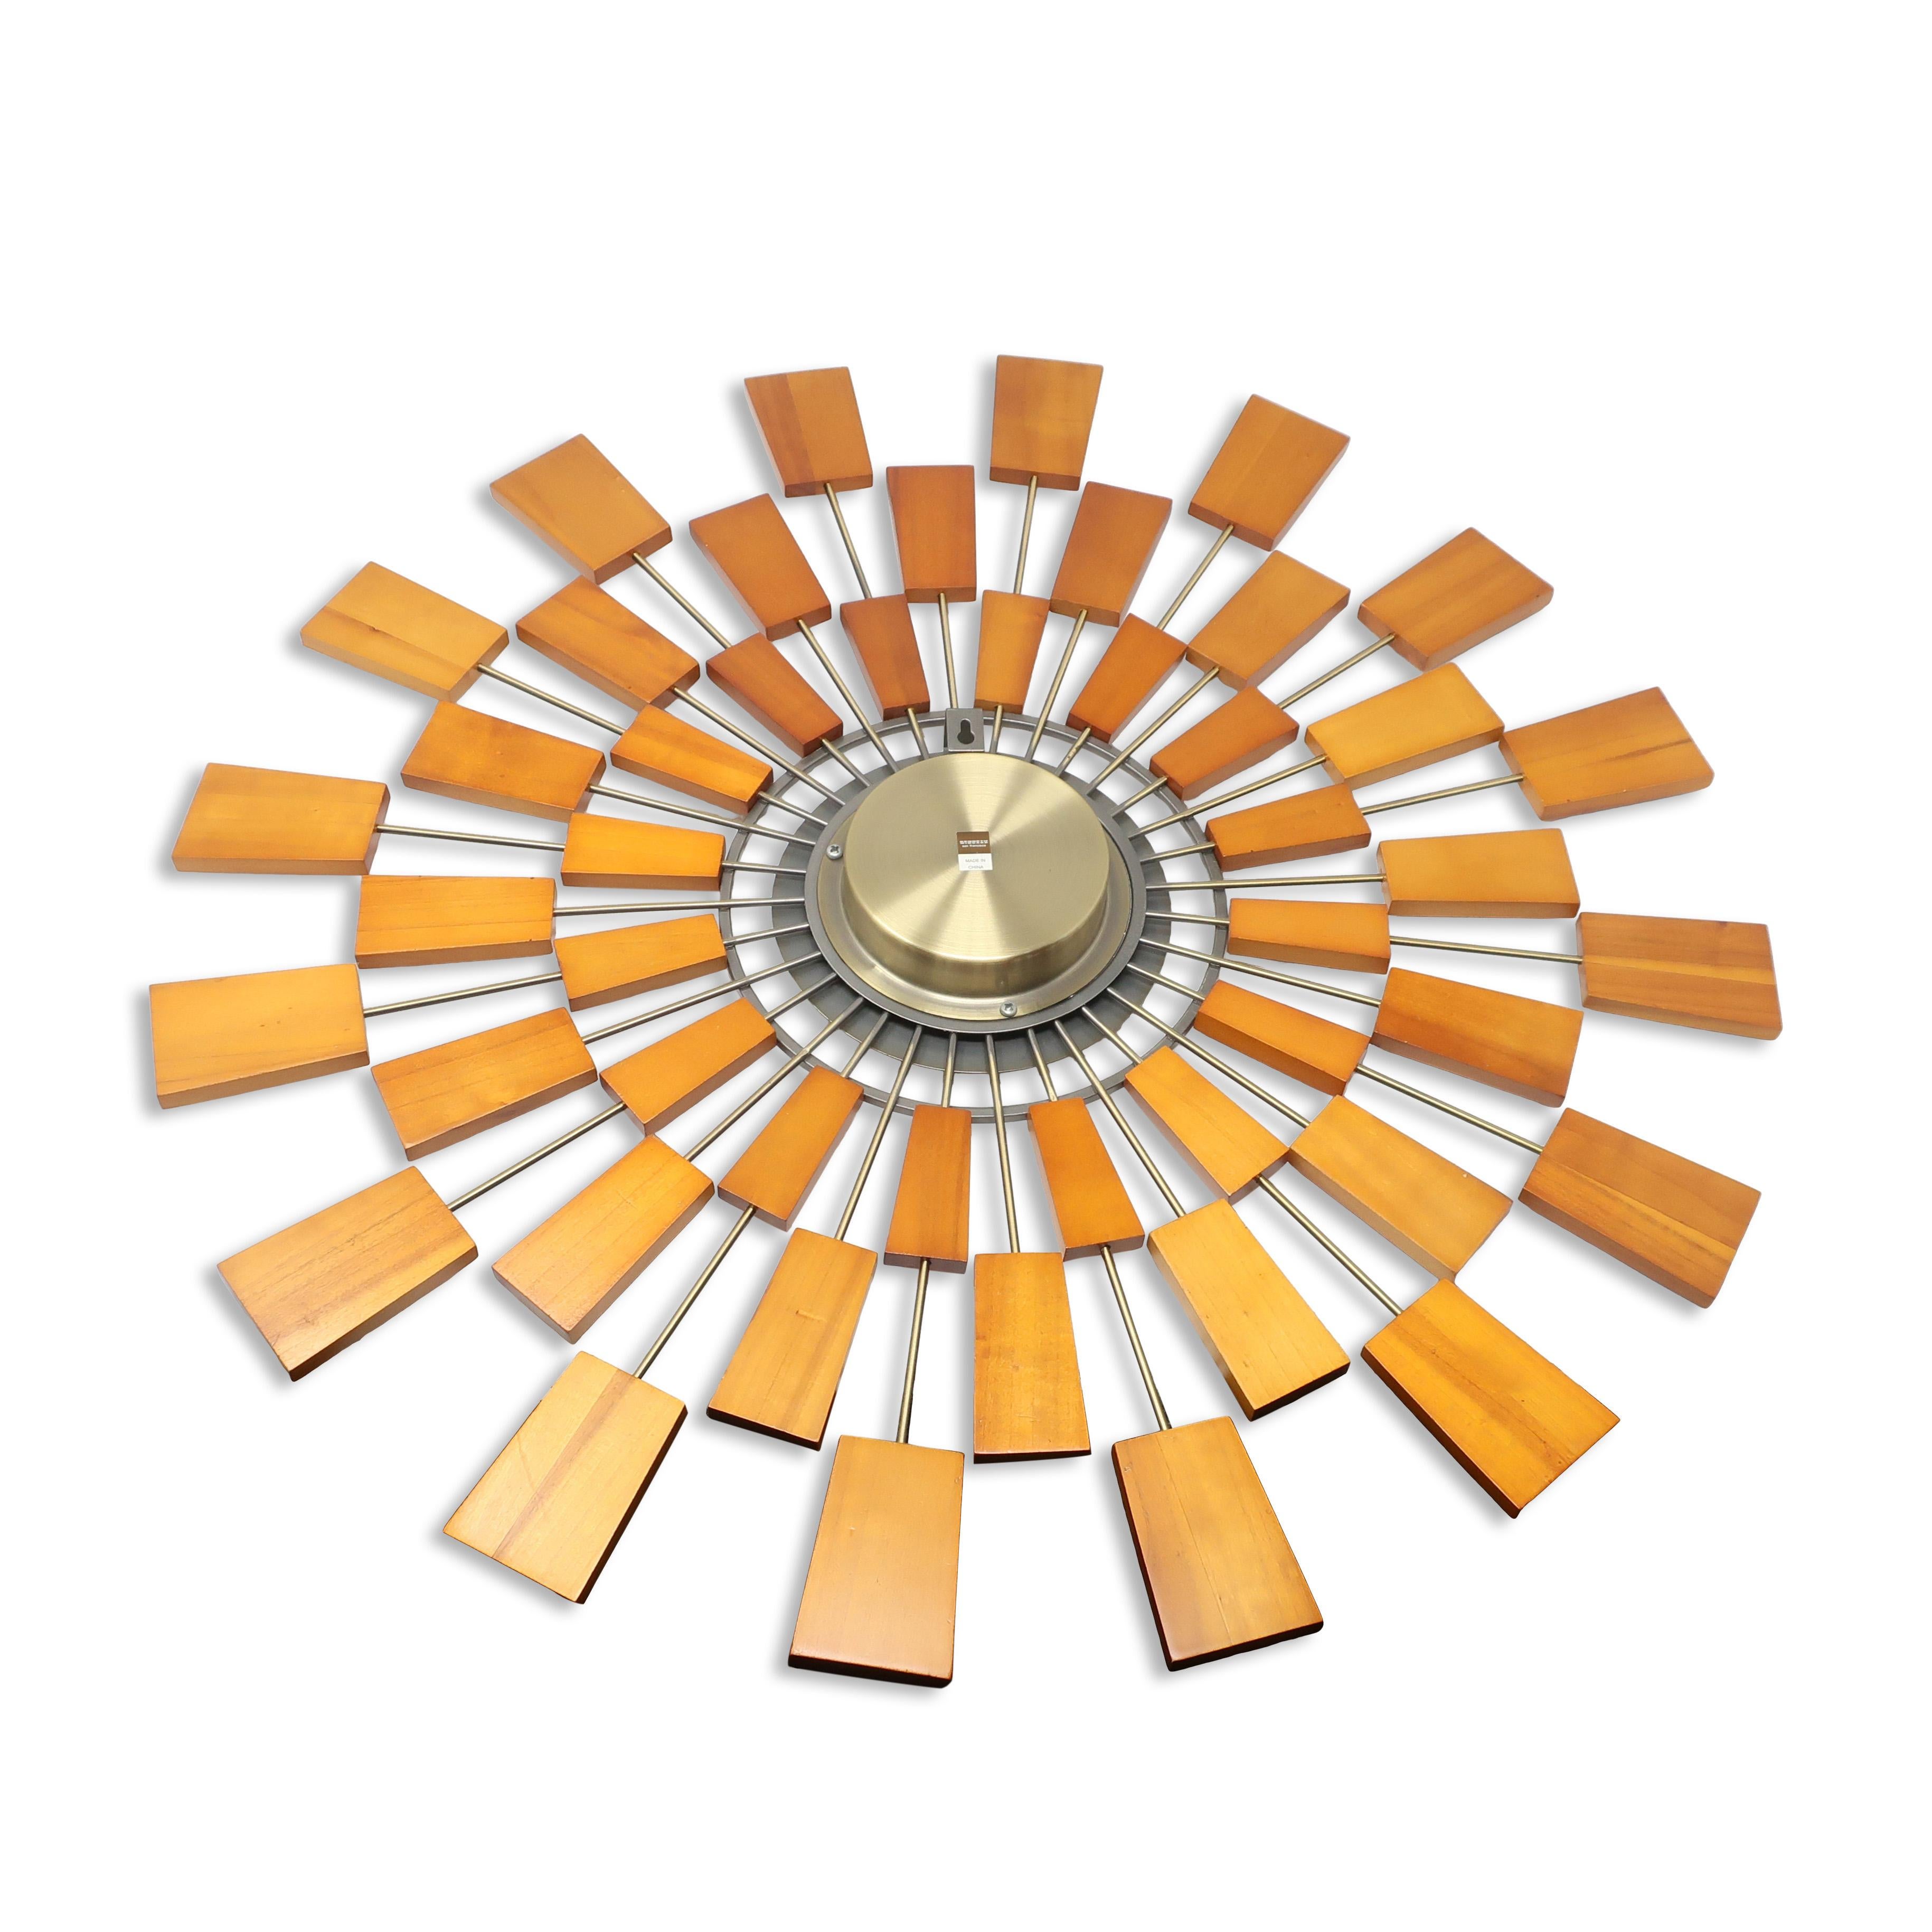 A striking wall clock designed by Kenneth Wingard to evoke the nostalgia of 1950s-style Sunburst clocks we all remember.  Produced in the 2000s, it is a perfect addition to any mid-century modern inspired home.  Features a round form of joined